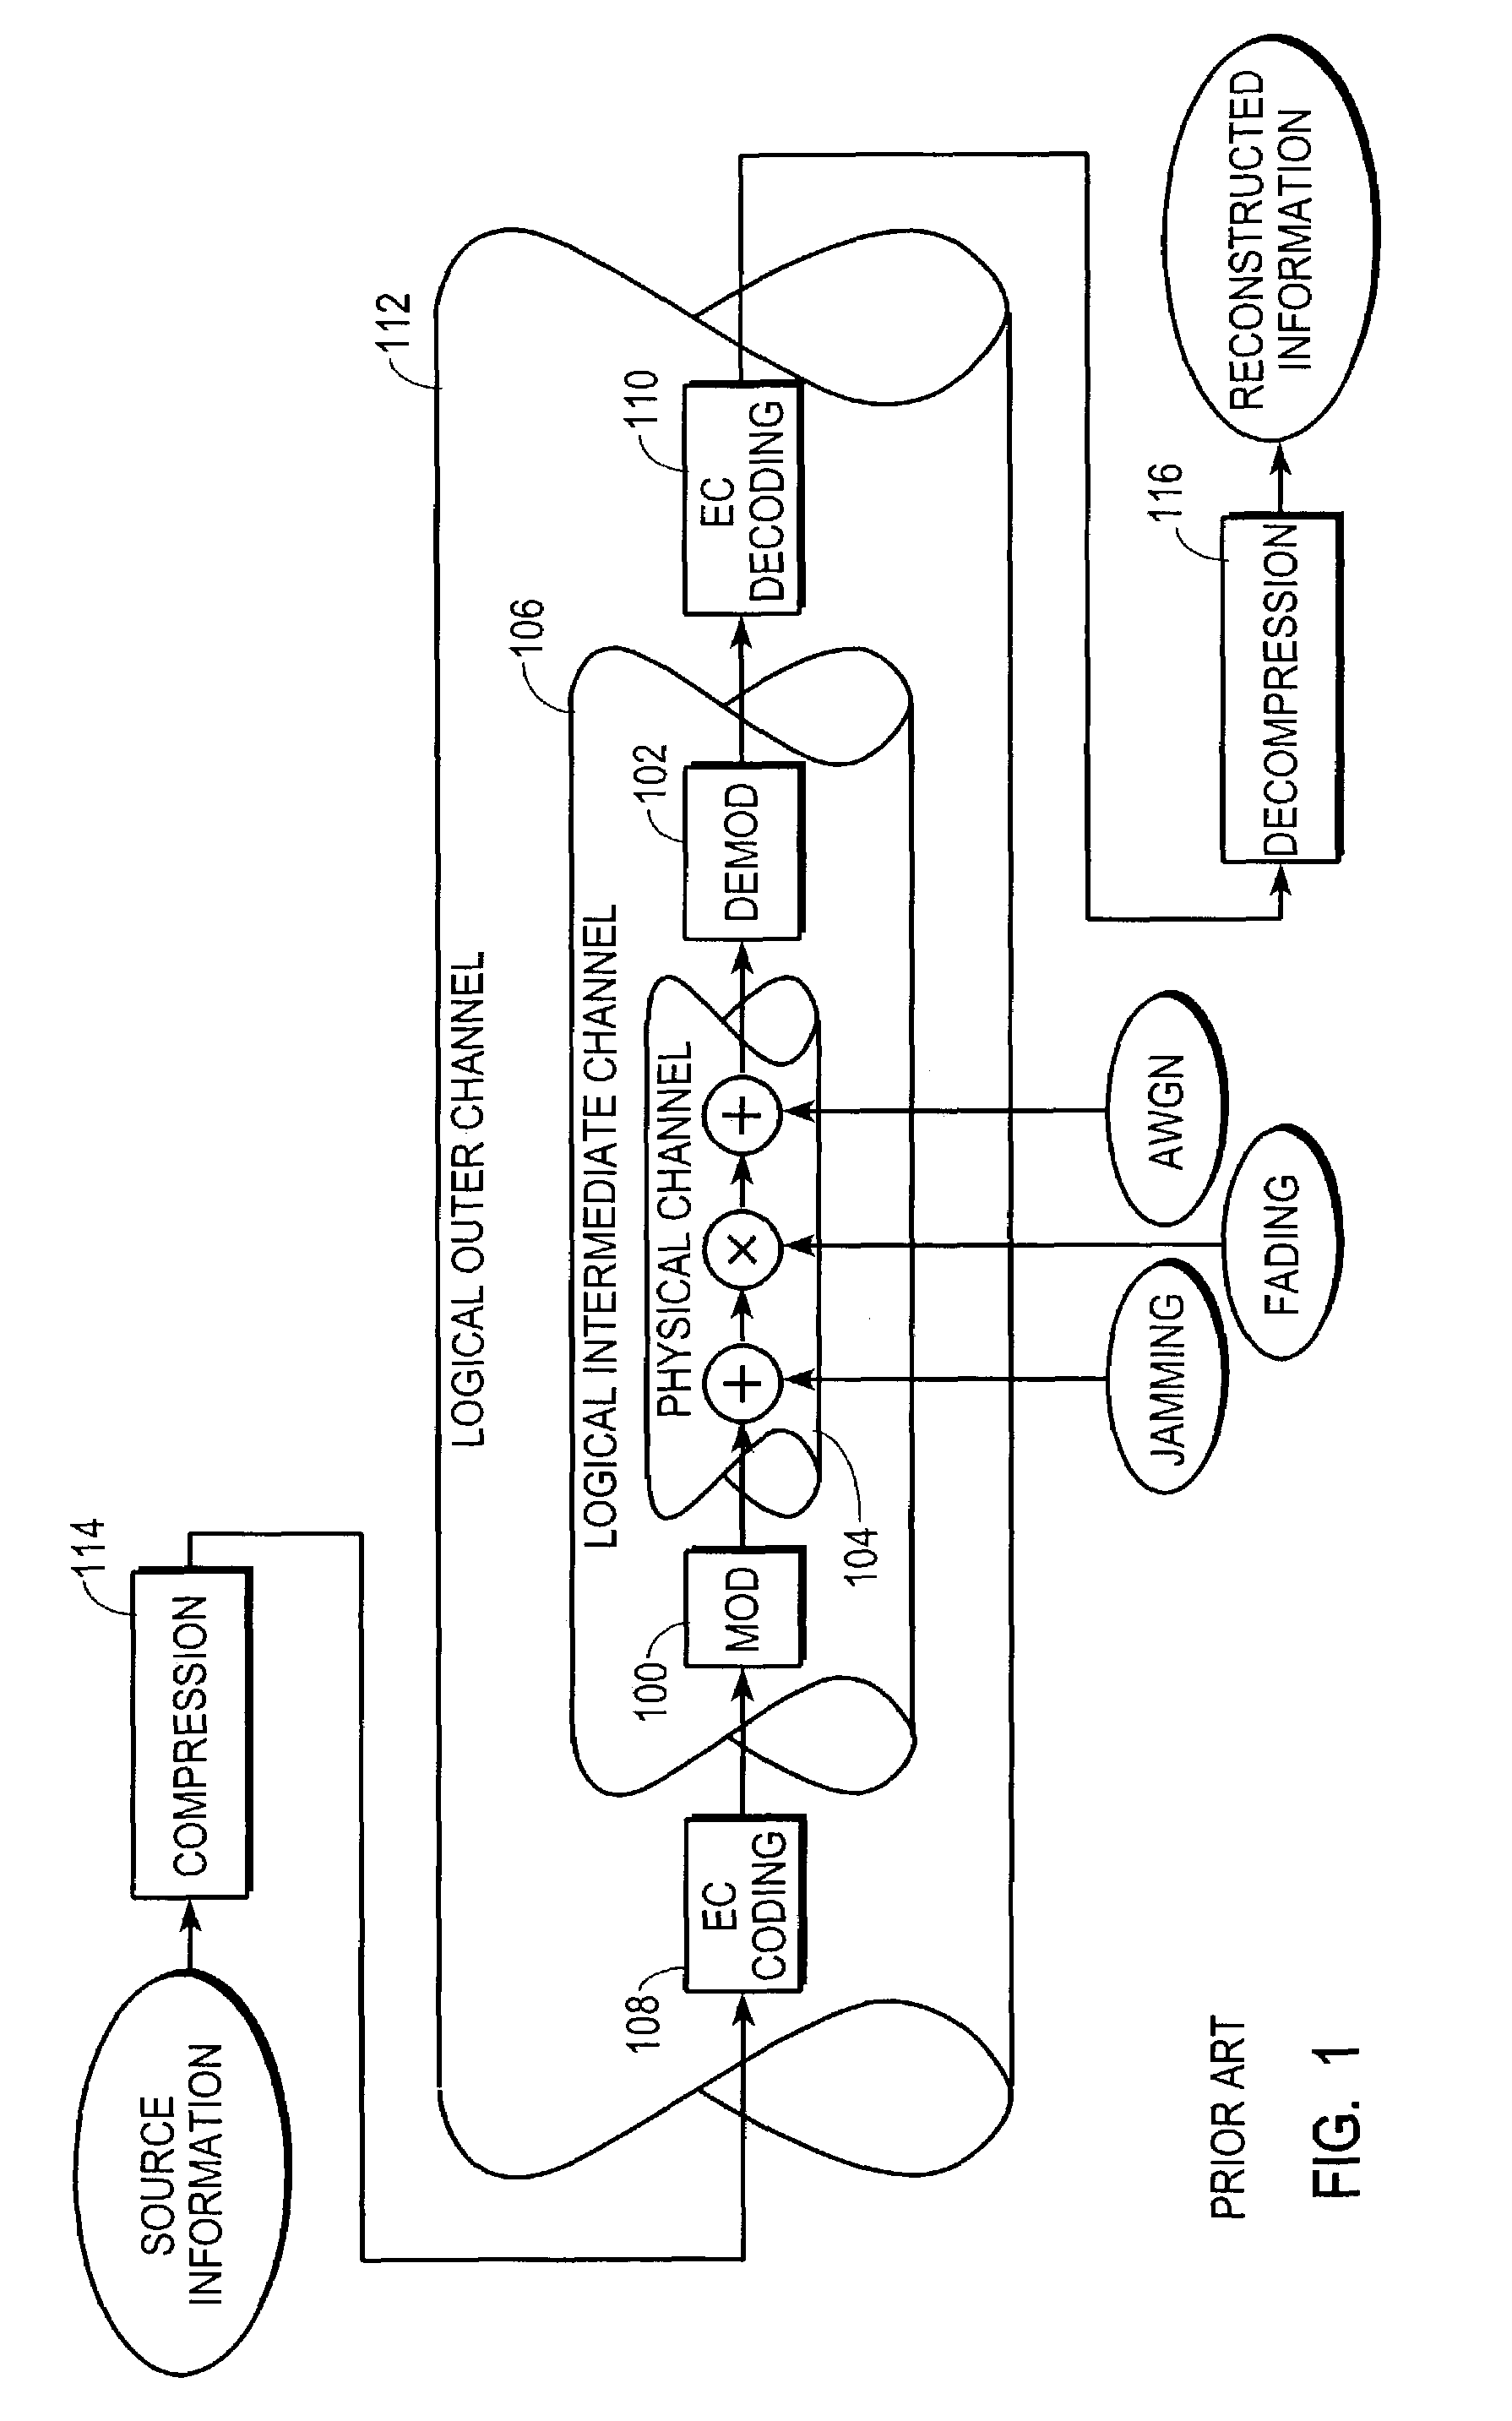 Method and apparatus for encoding compressible data for transmission over variable quality communication channel